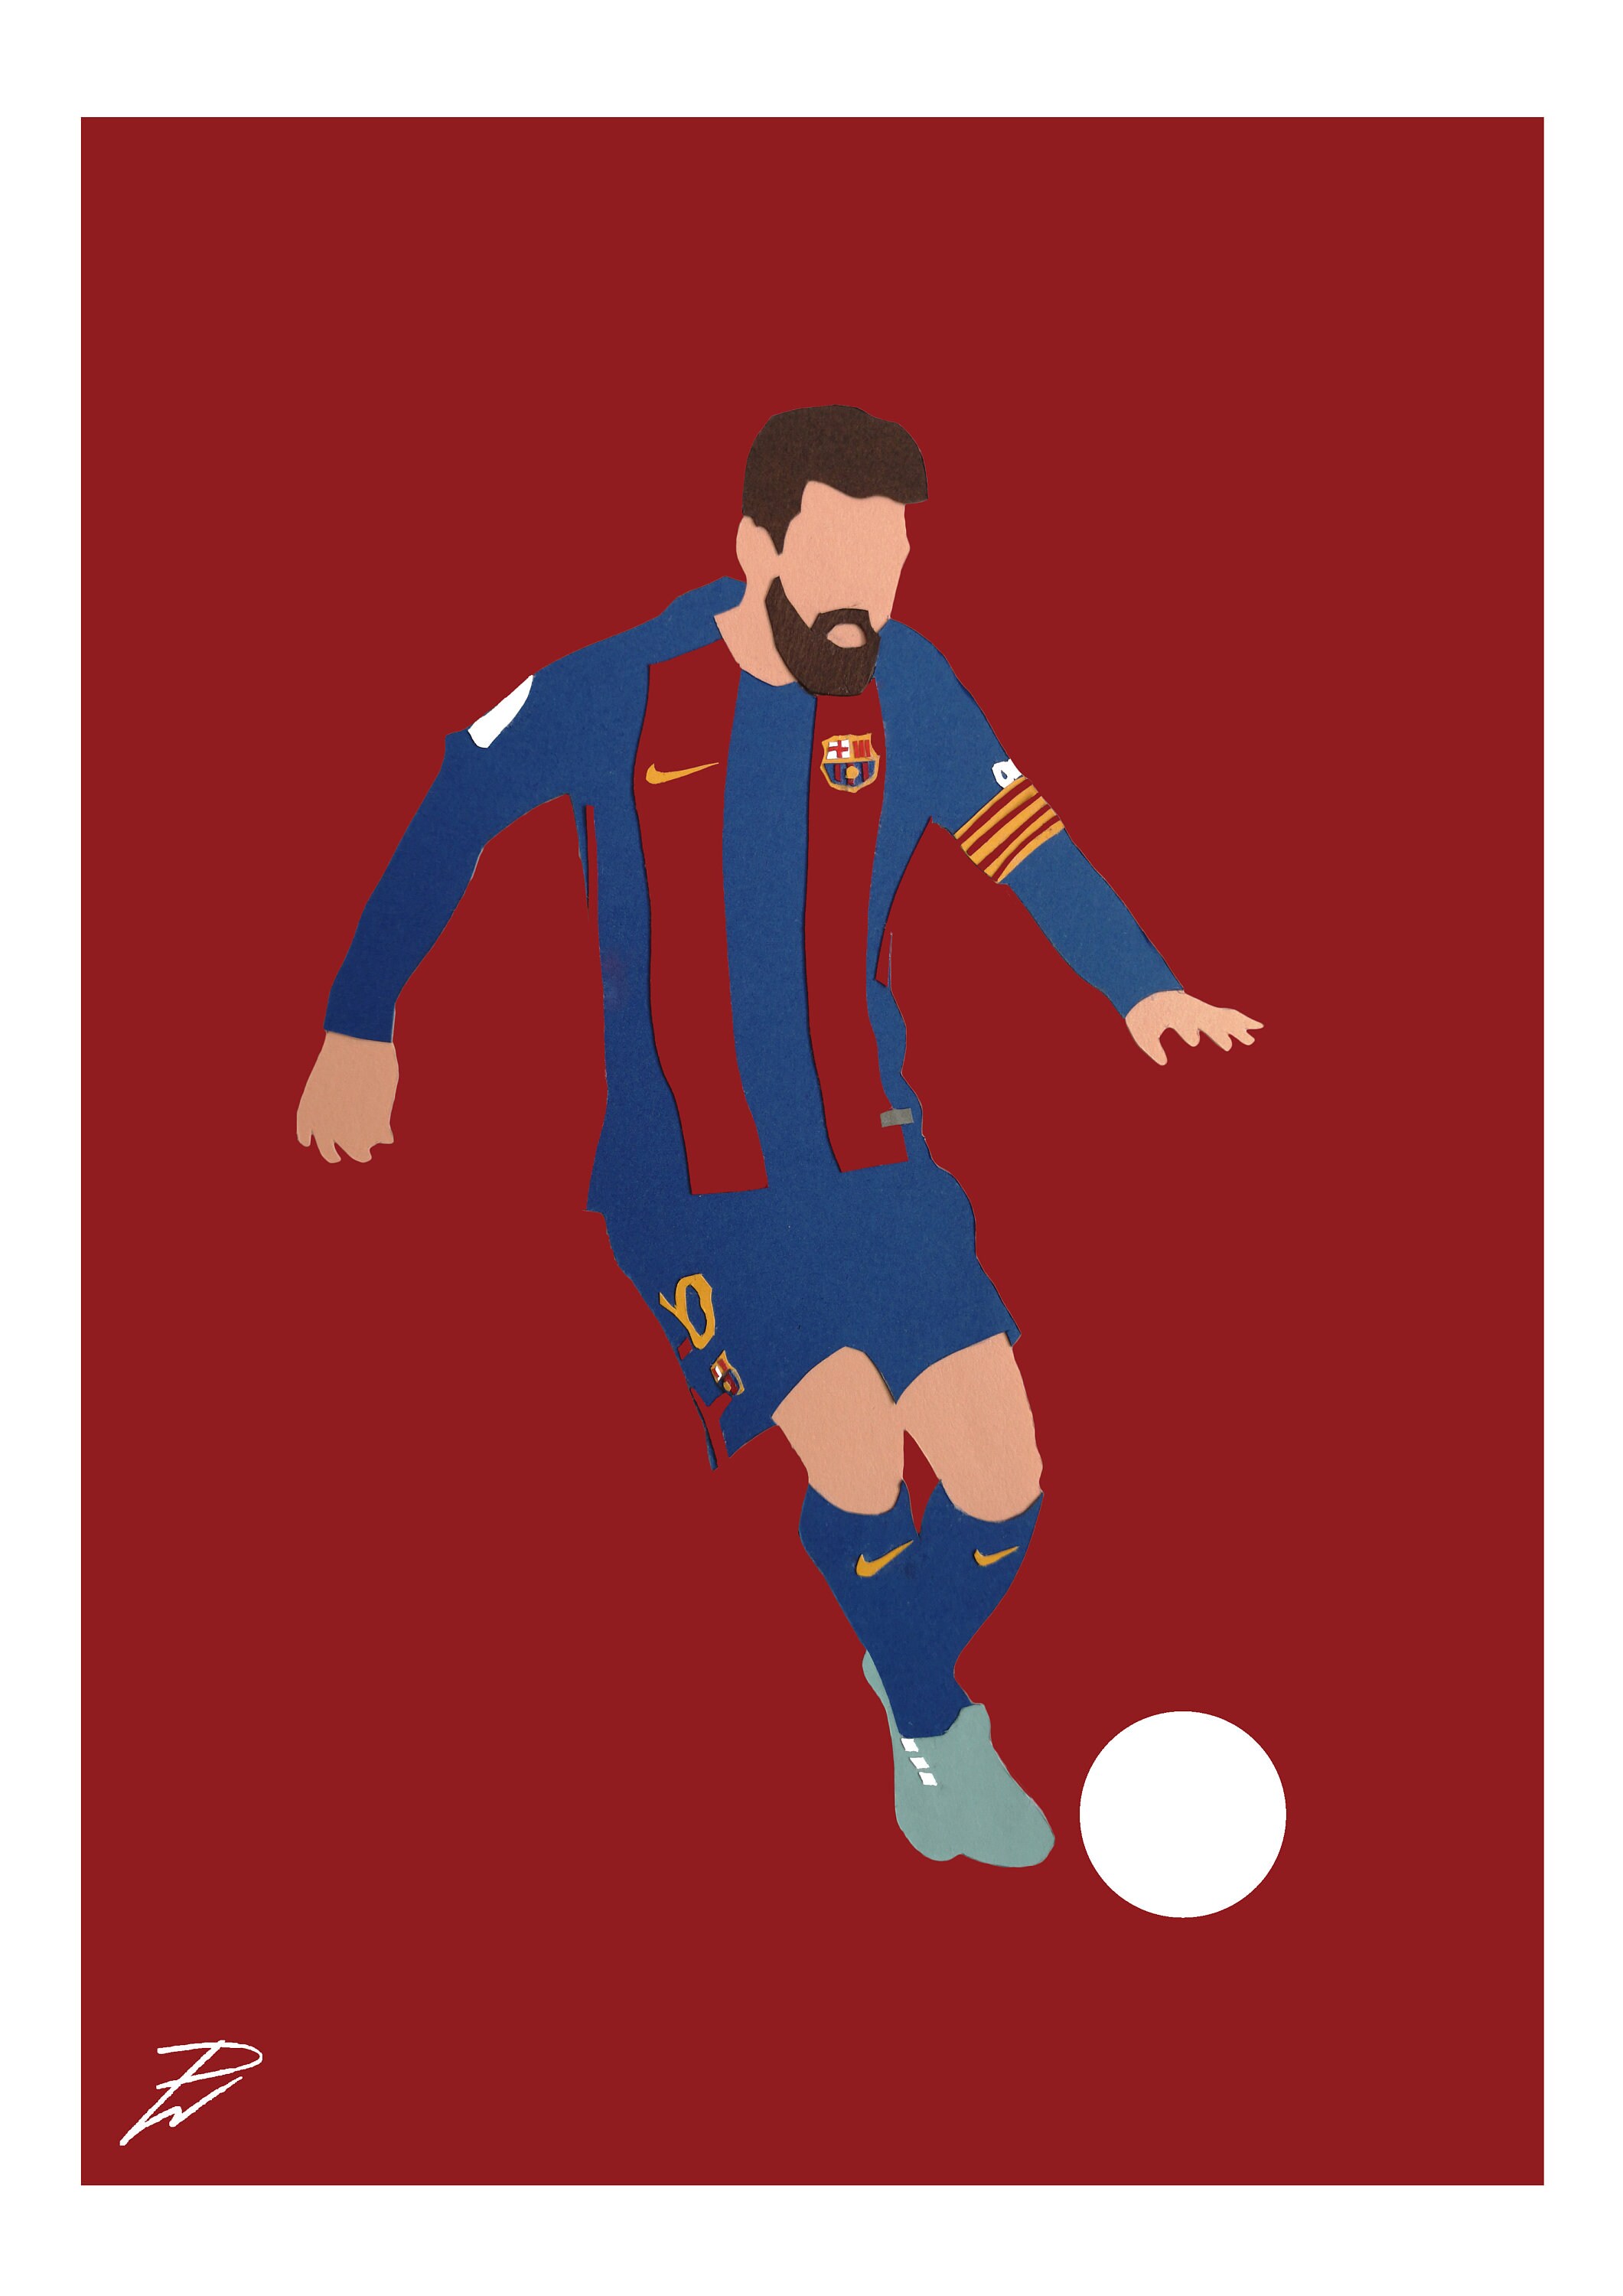 LIONEL MESSI LMSI03 POSTER PRINT A4  A3 BUY 2 GET 3RD FREE 